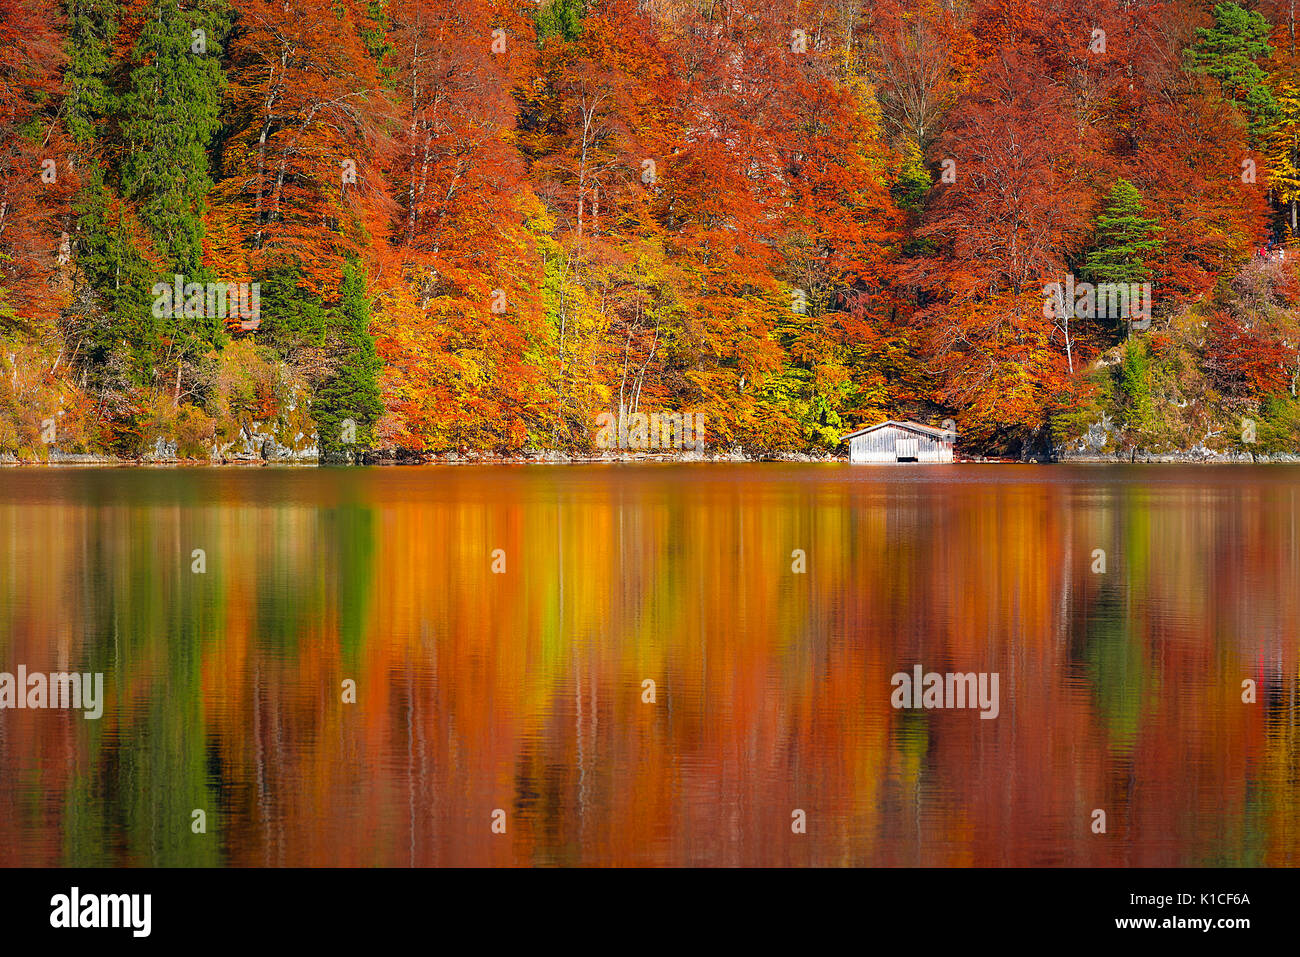 Trees with leaves in fall colors and a white wooden cottage, mirrored in the water of the Alpsee lake, located in Fussen, Germany. Stock Photo